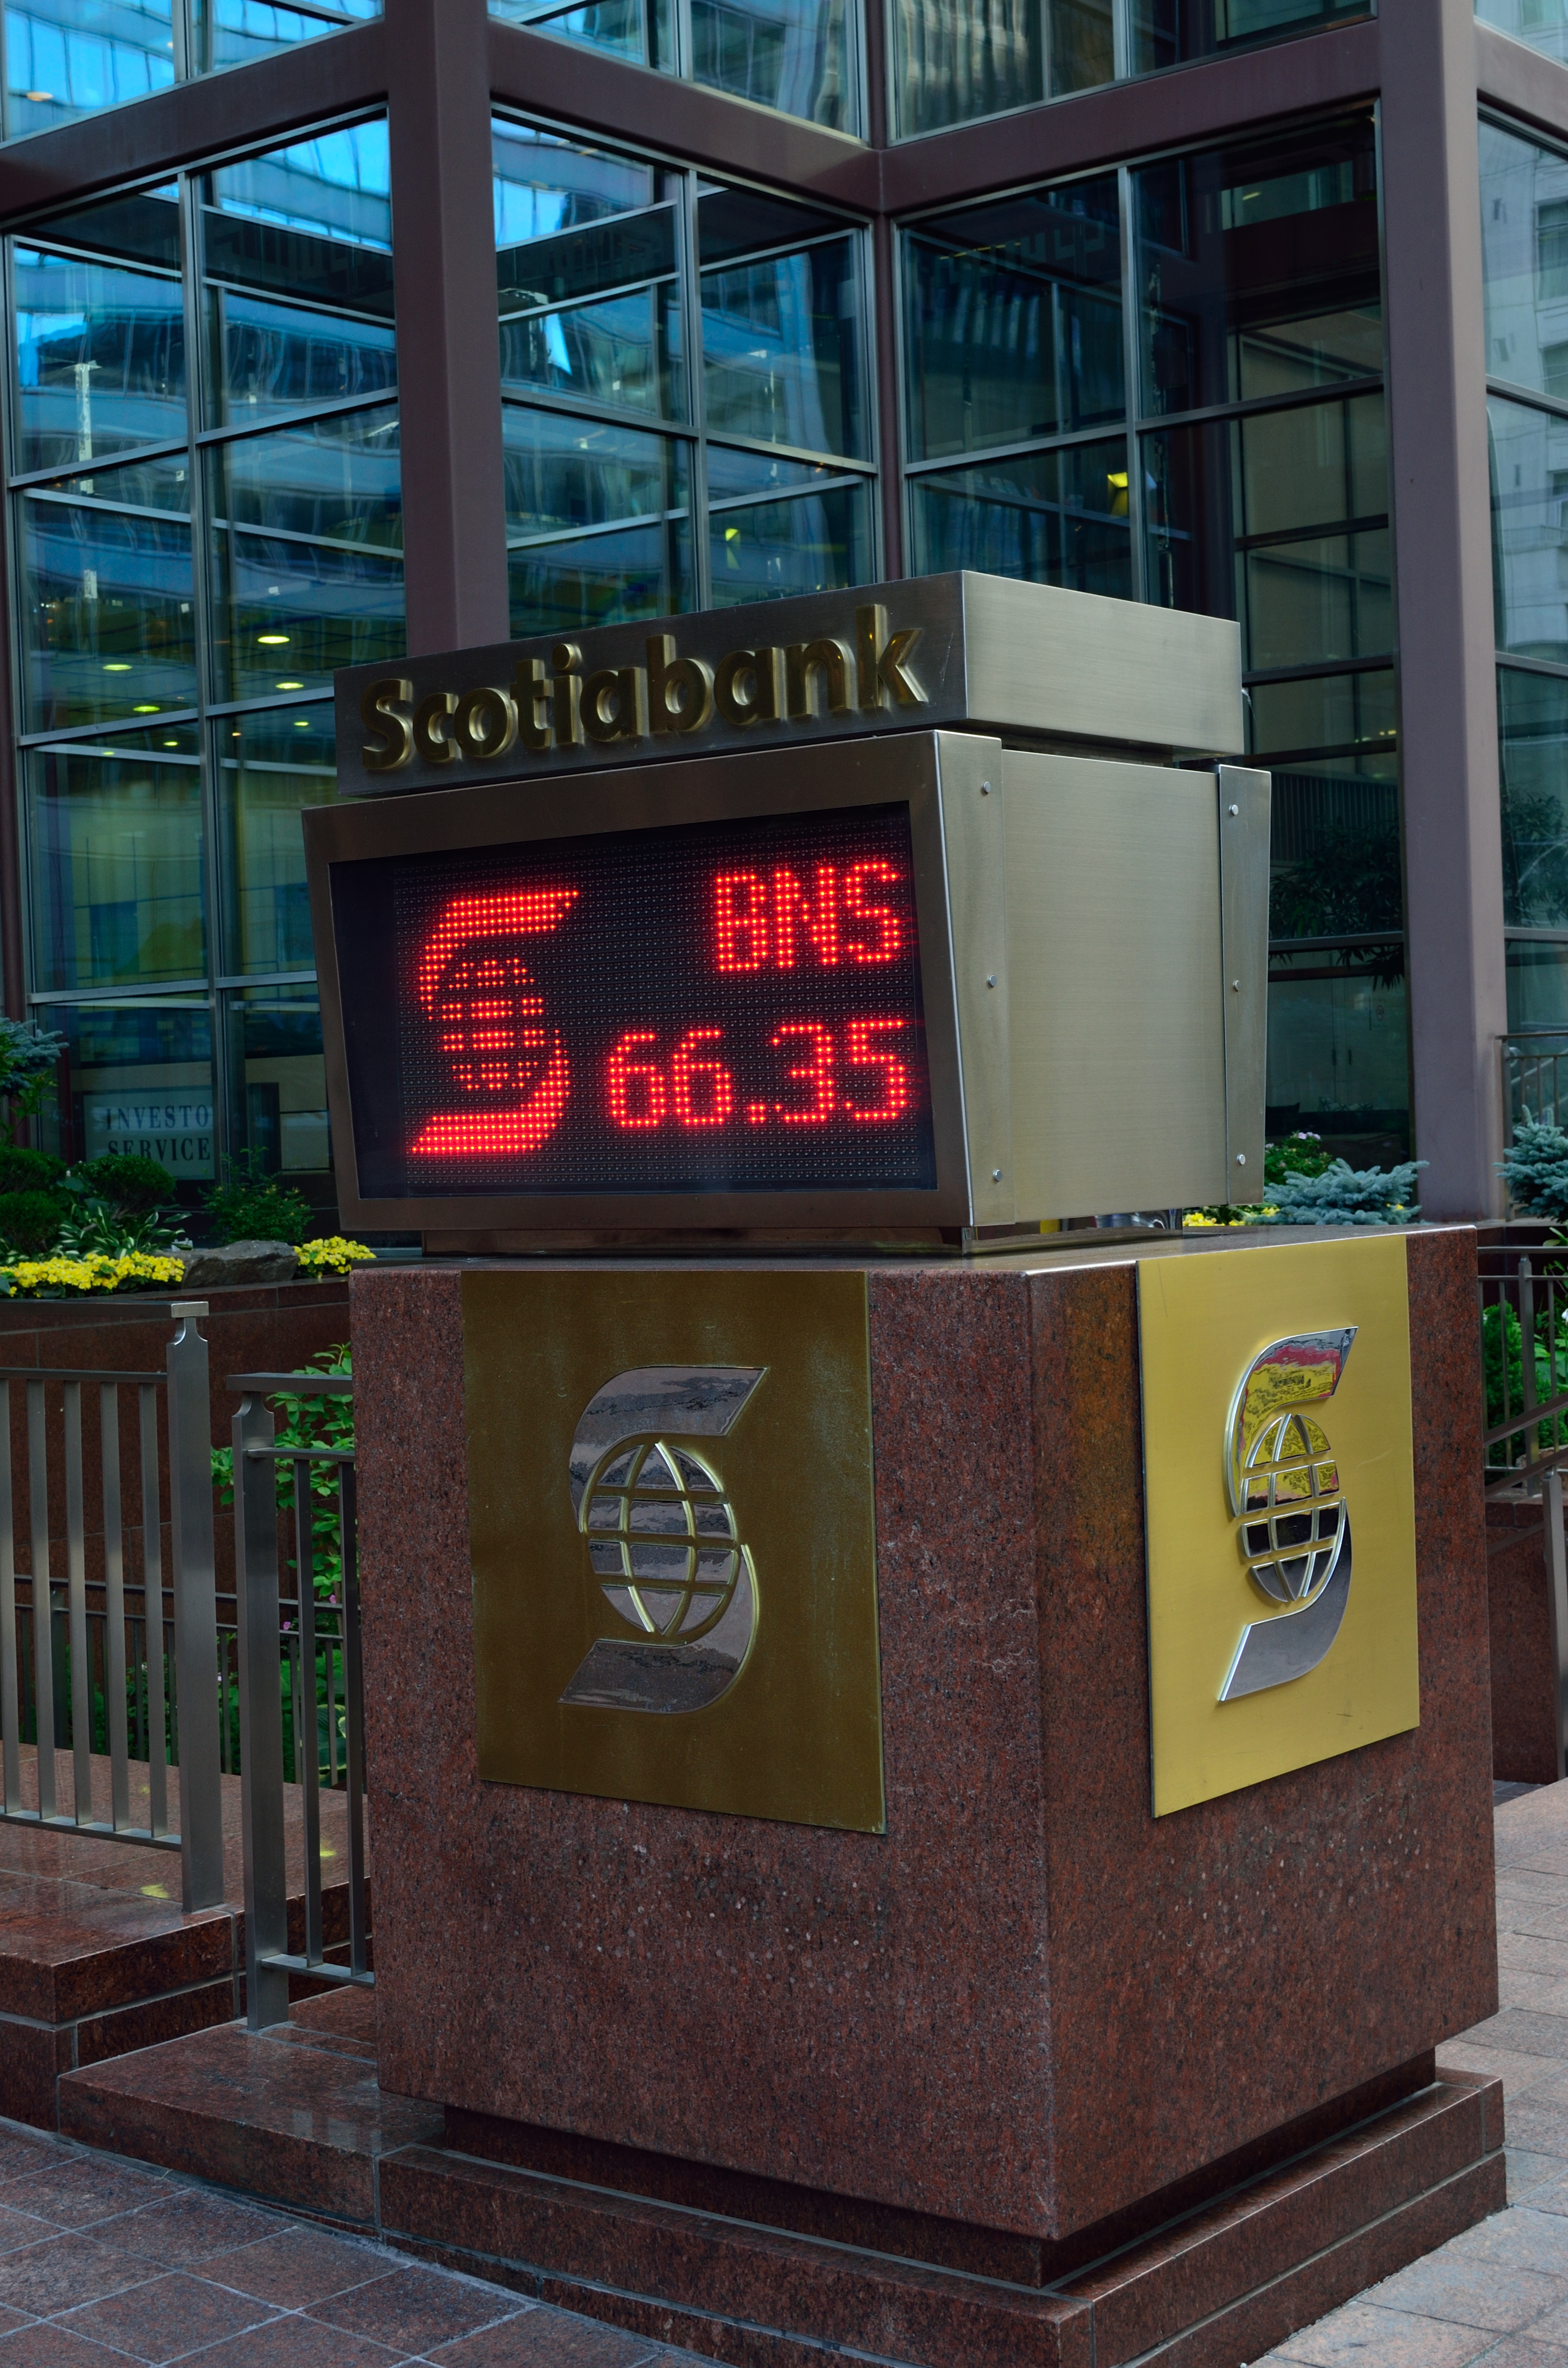 Bank Of Nova Scotia: Earnings Did Not Disappoint - The ...